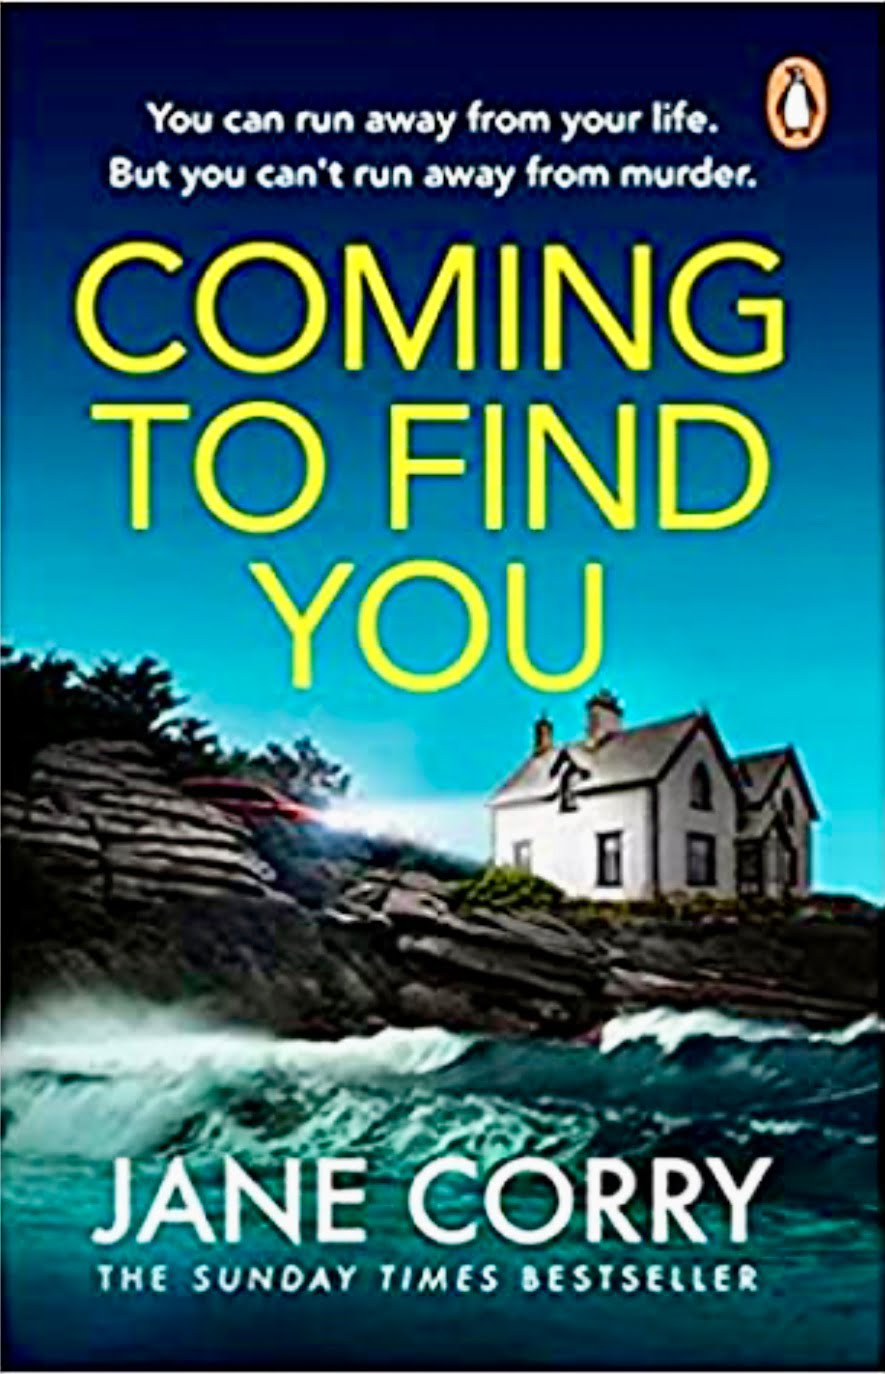 COMING TO FIND YOU BY JANE CORRY – BOOK REVIEW